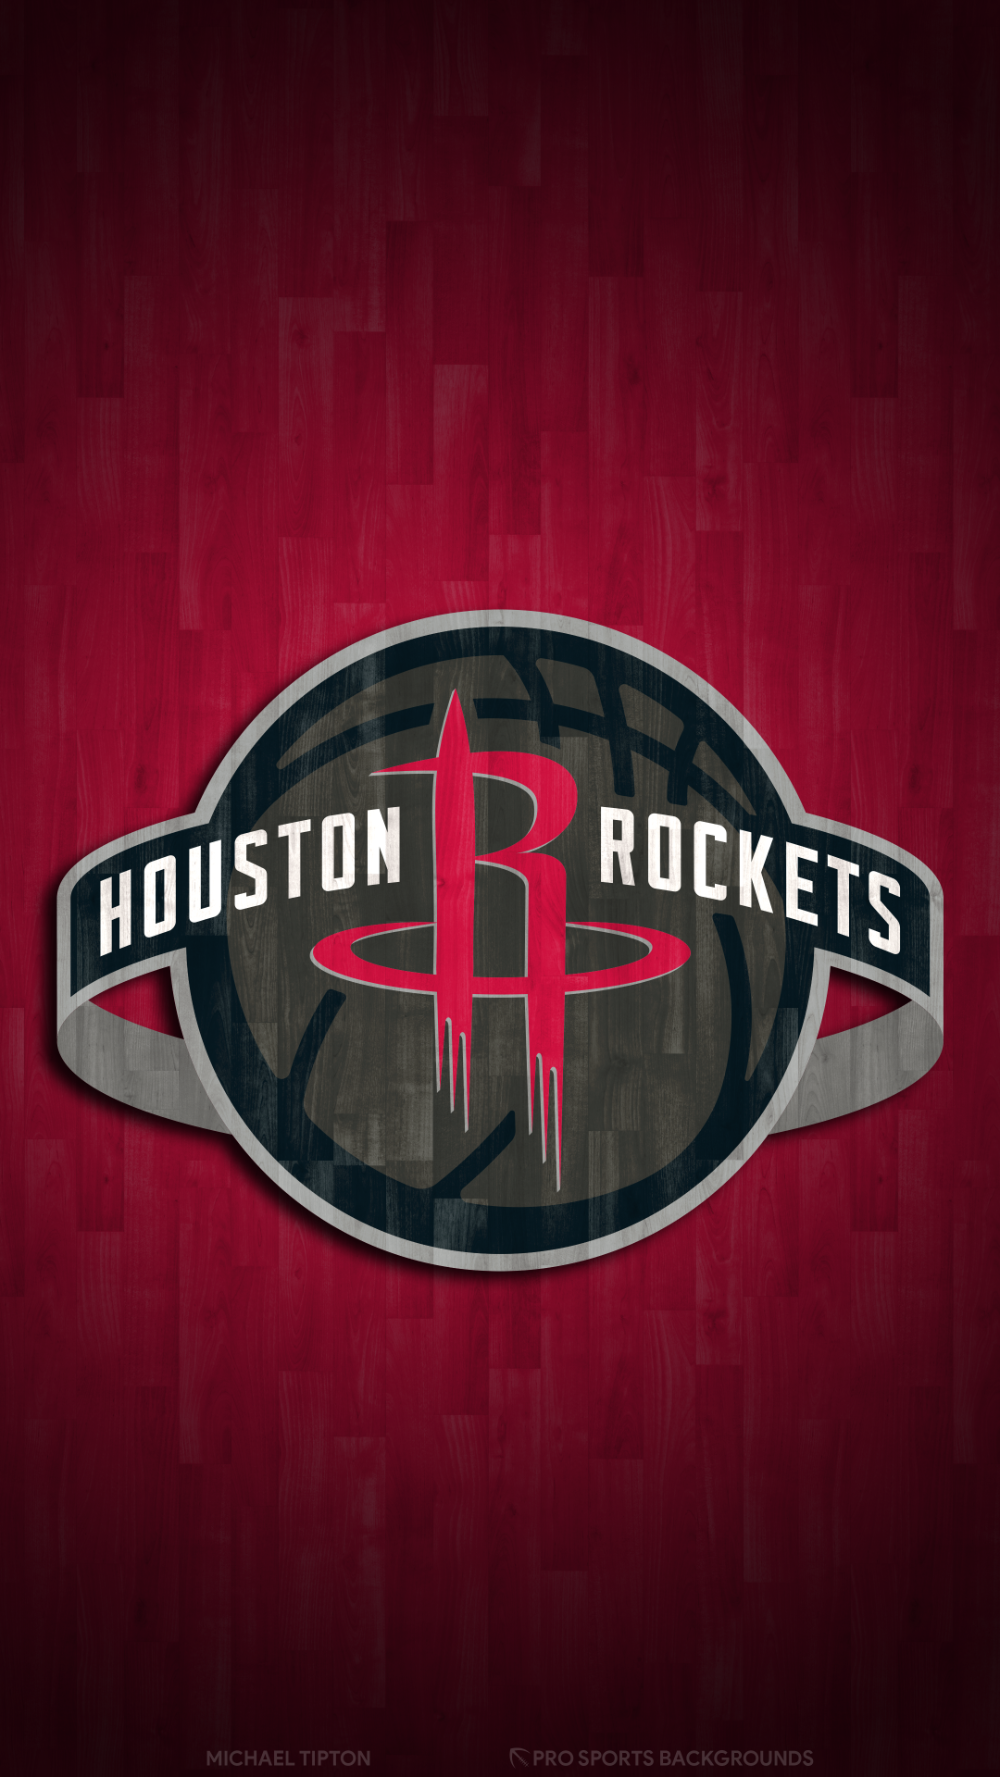 Houston Rockets 2021 Wallpapers - Wallpaper Cave